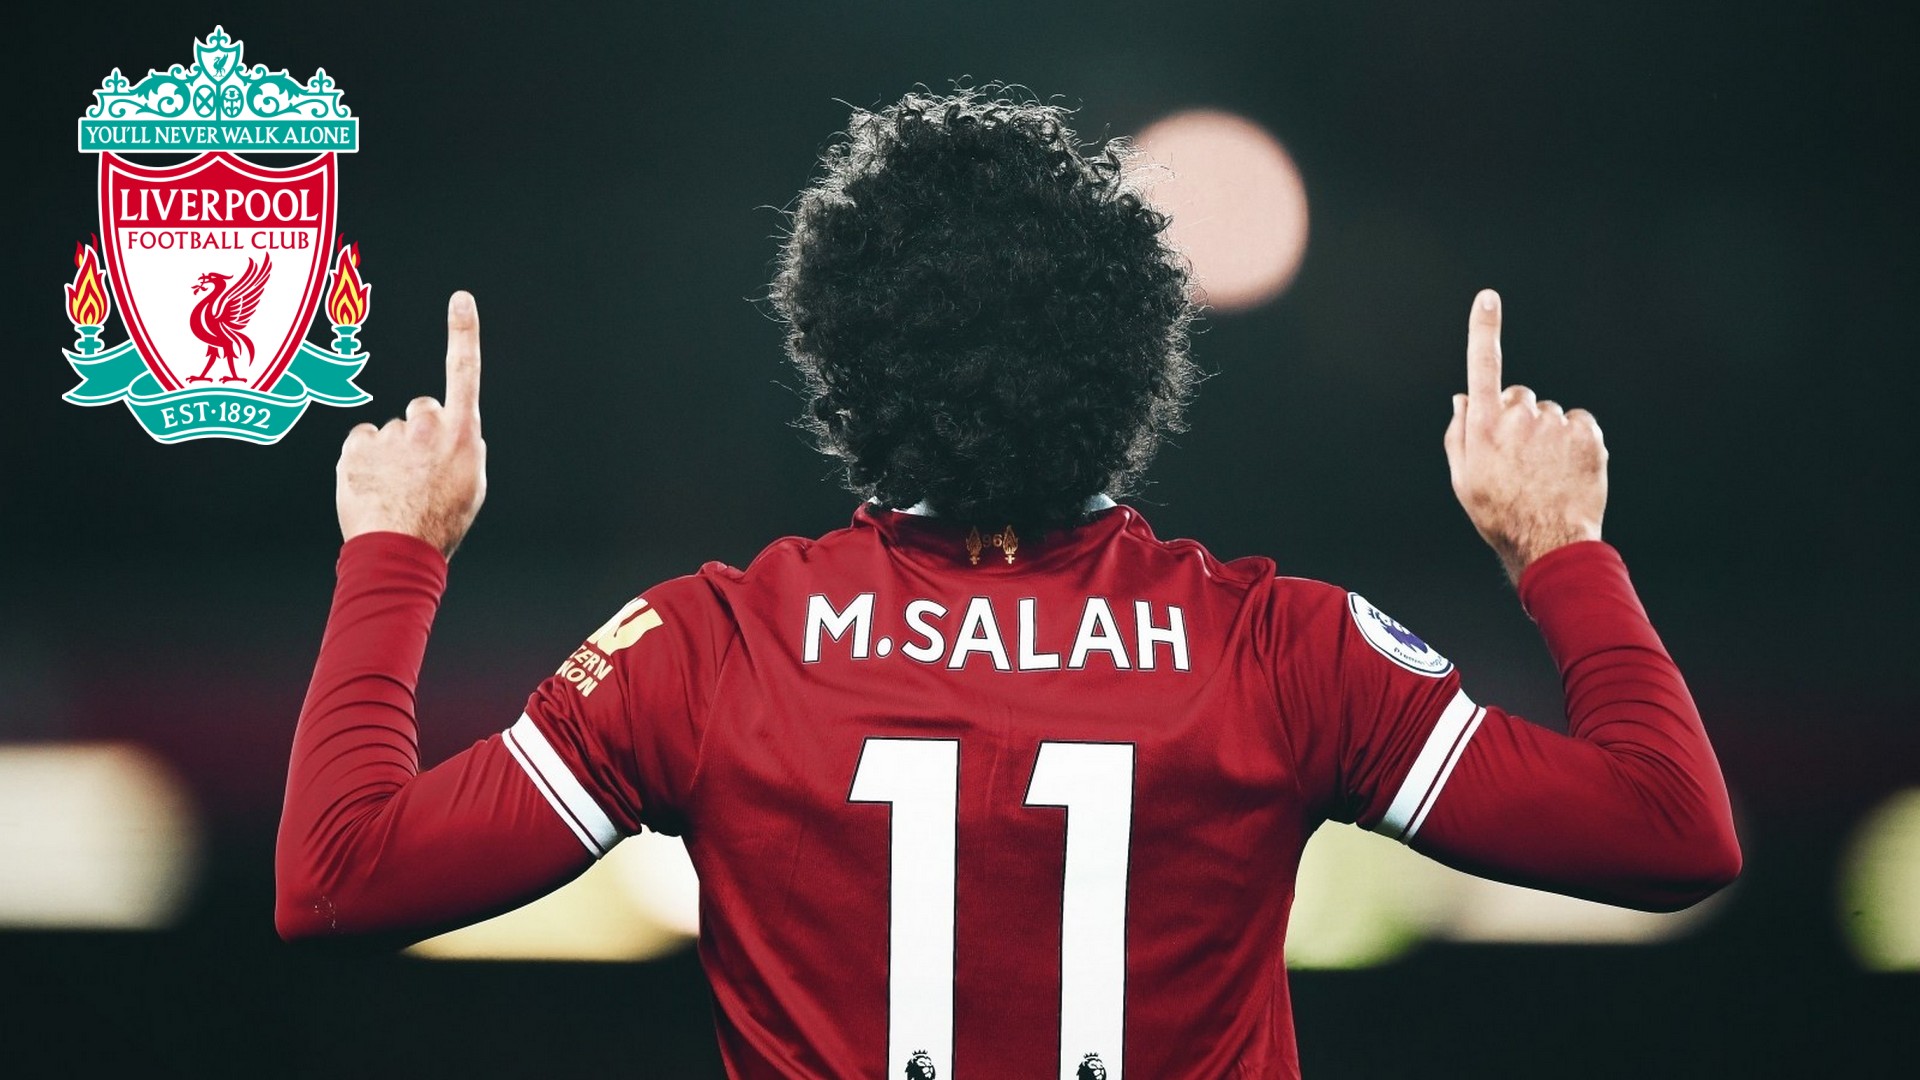 Wallpaper Liverpool Mohamed Salah Desktop with image resolution 1920x1080 pixel. You can use this wallpaper as background for your desktop Computer Screensavers, Android or iPhone smartphones